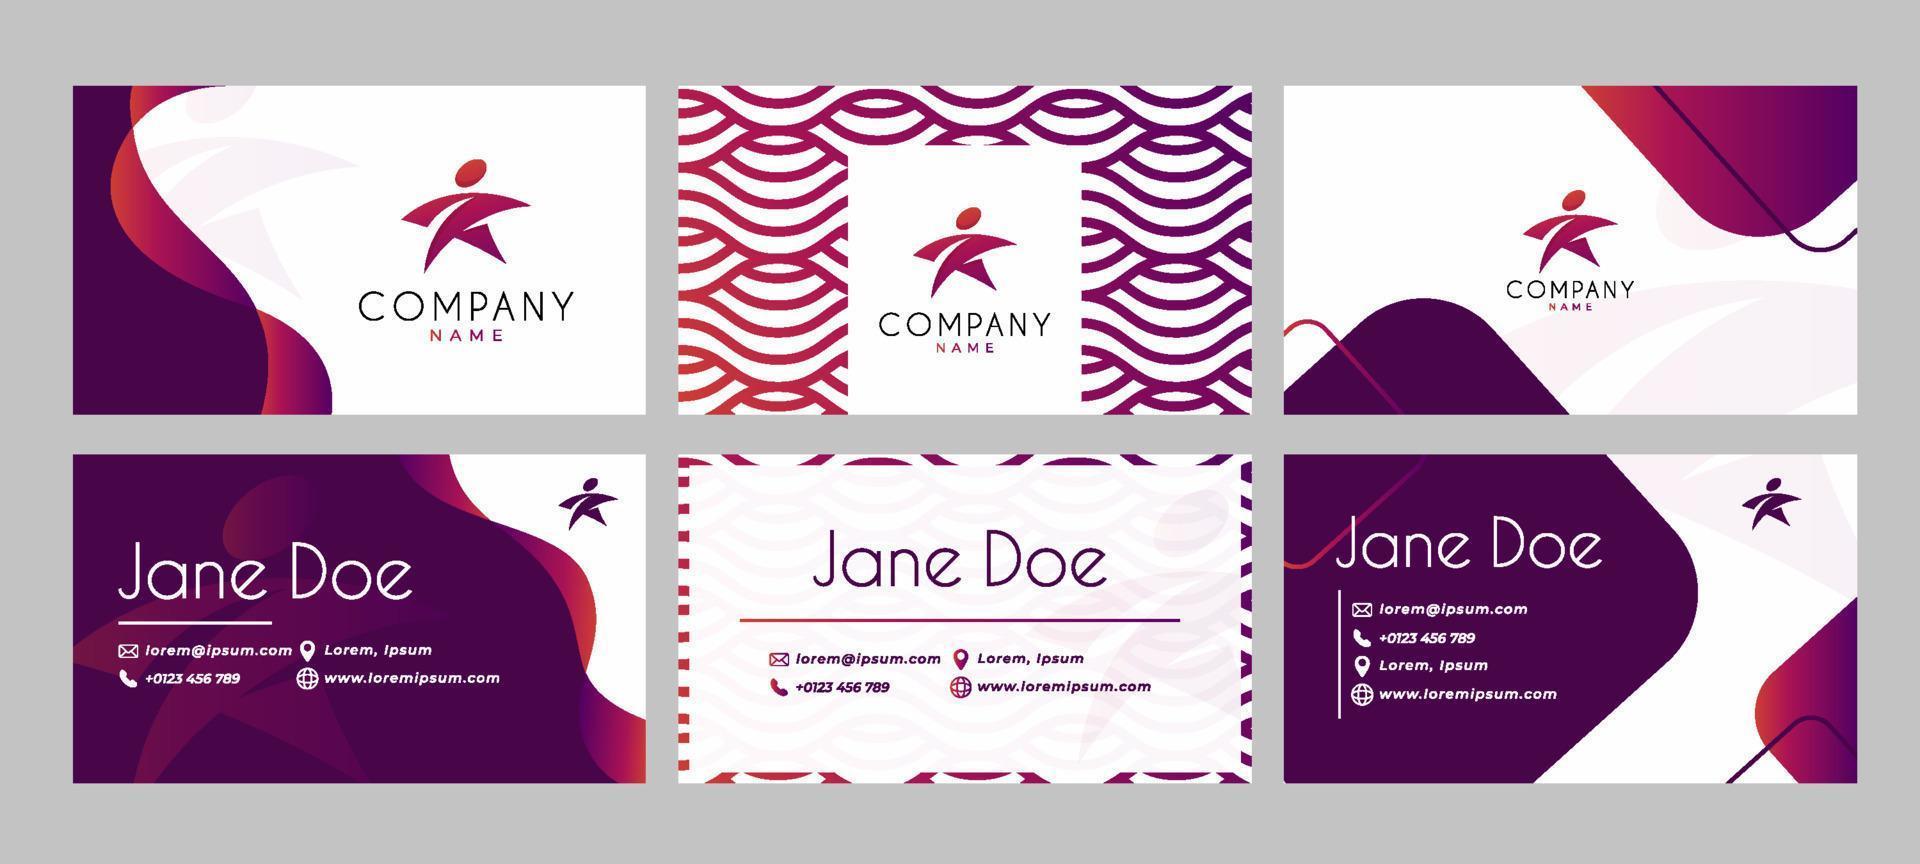 Gradient Wavy Vibrant Color Business Card Template vector